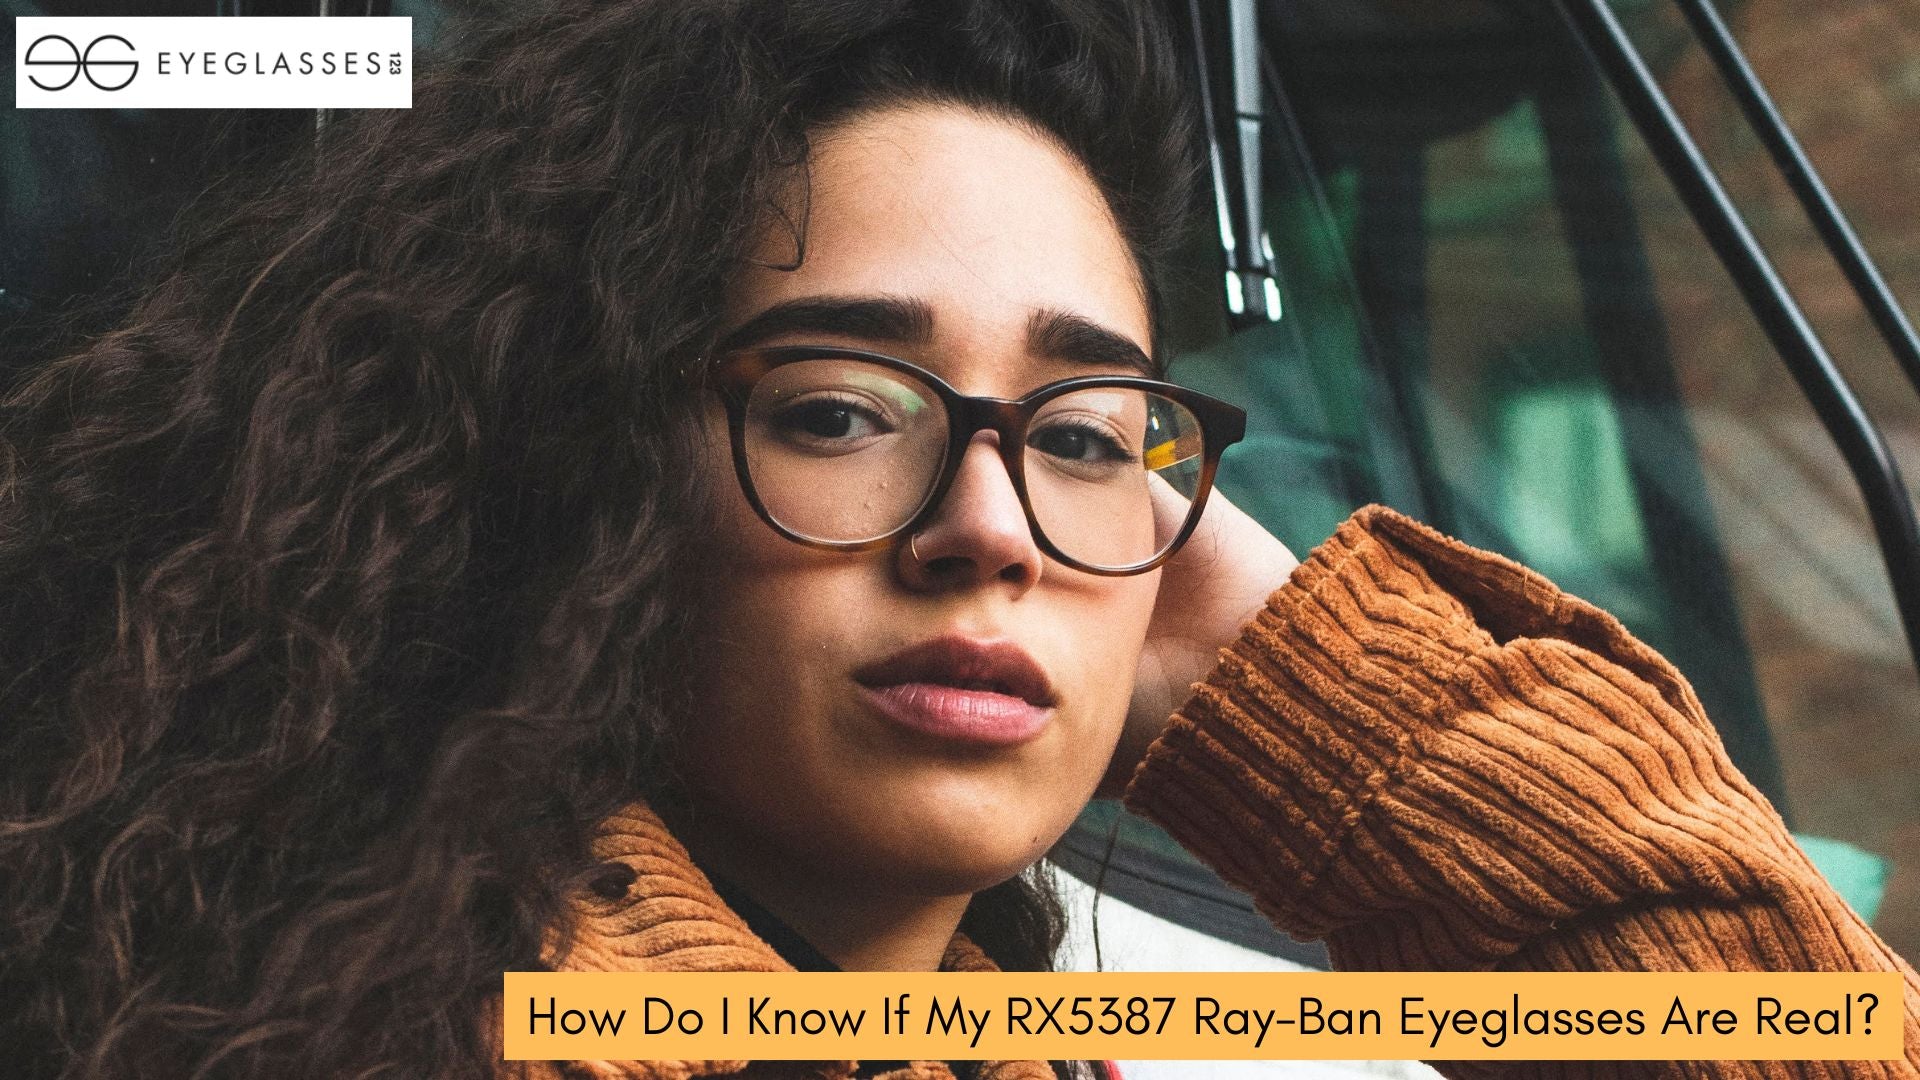 How Do I Know If My RX5387 Ray-Ban Eyeglasses Are Real?